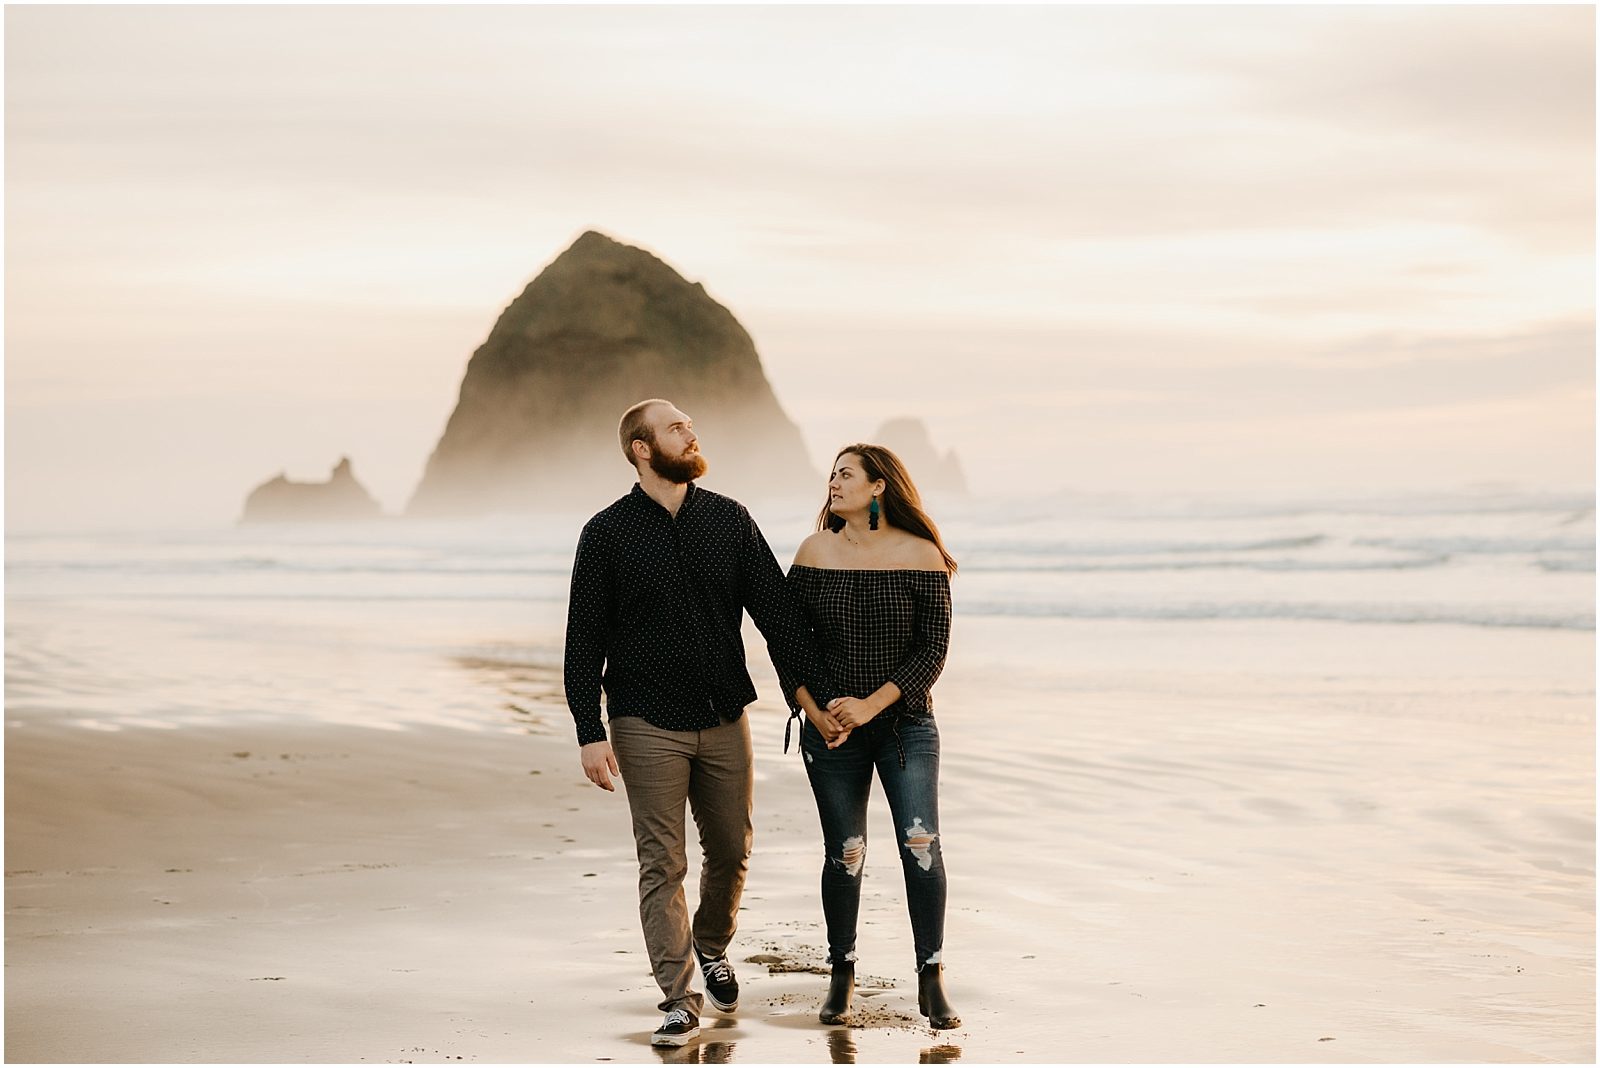 Couple walking on the sand at sunset at Cannon beach with Haystack rock in the background